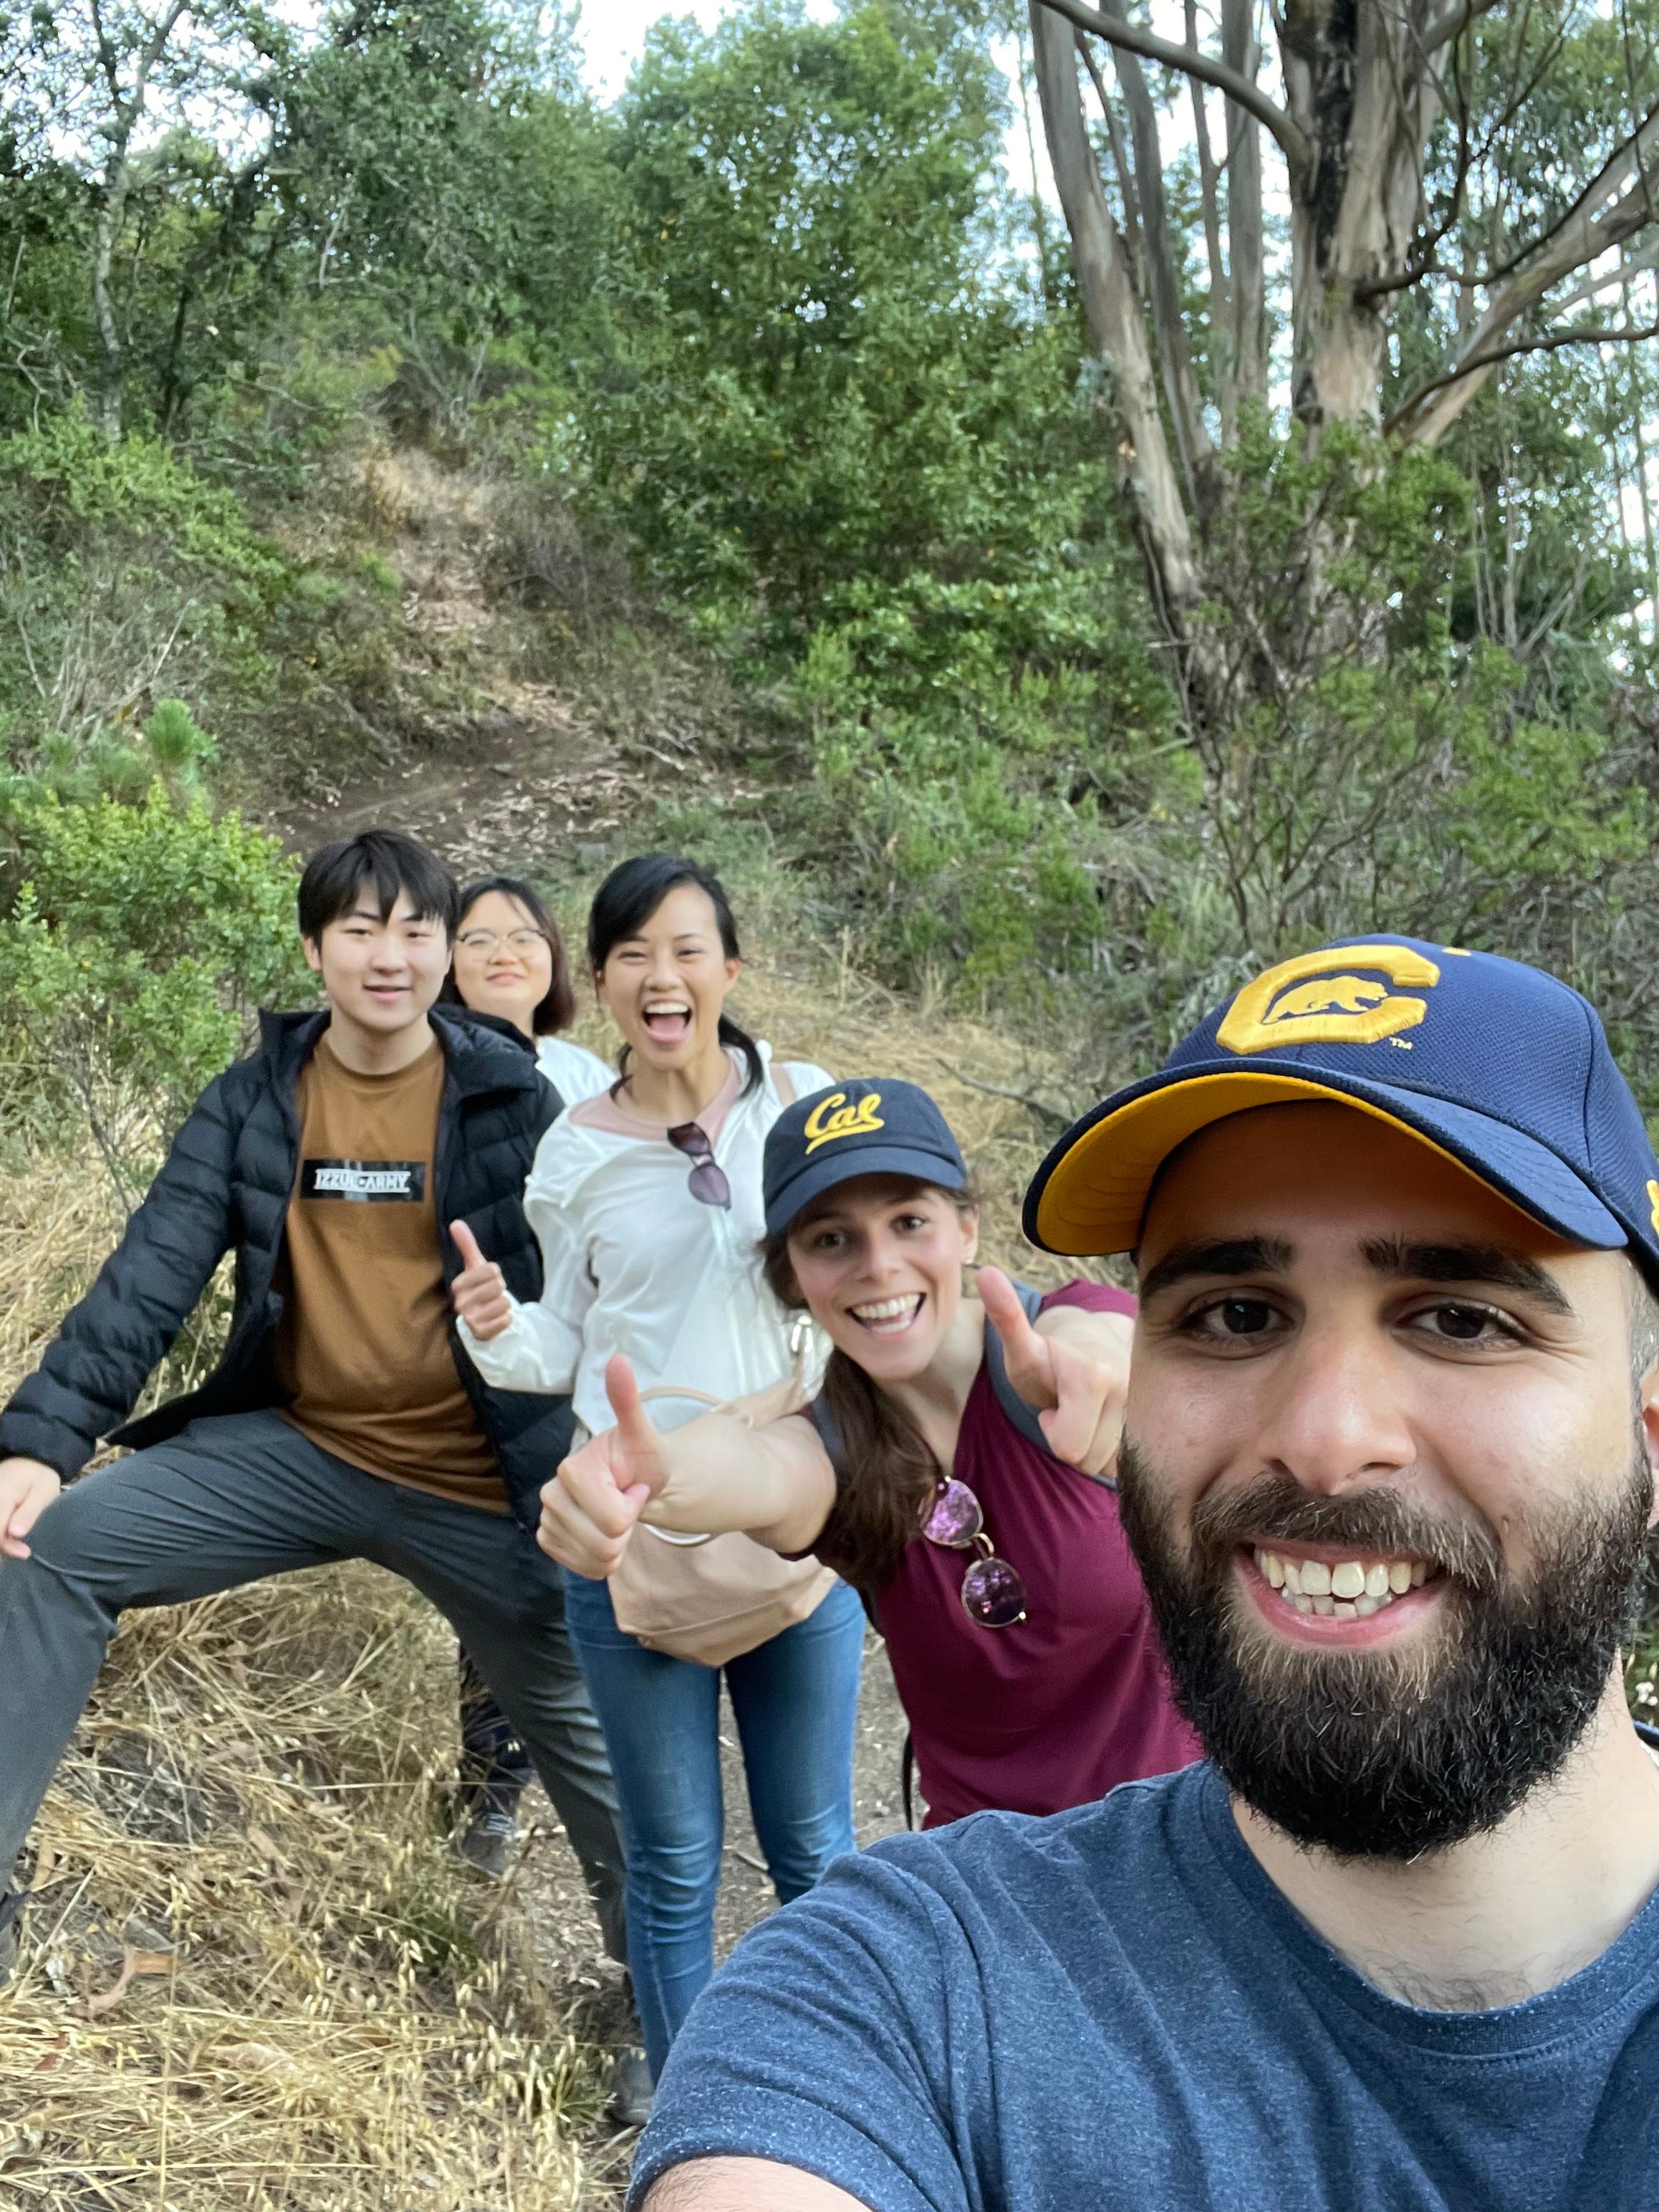 Smiling people posing for group selfie during a hike